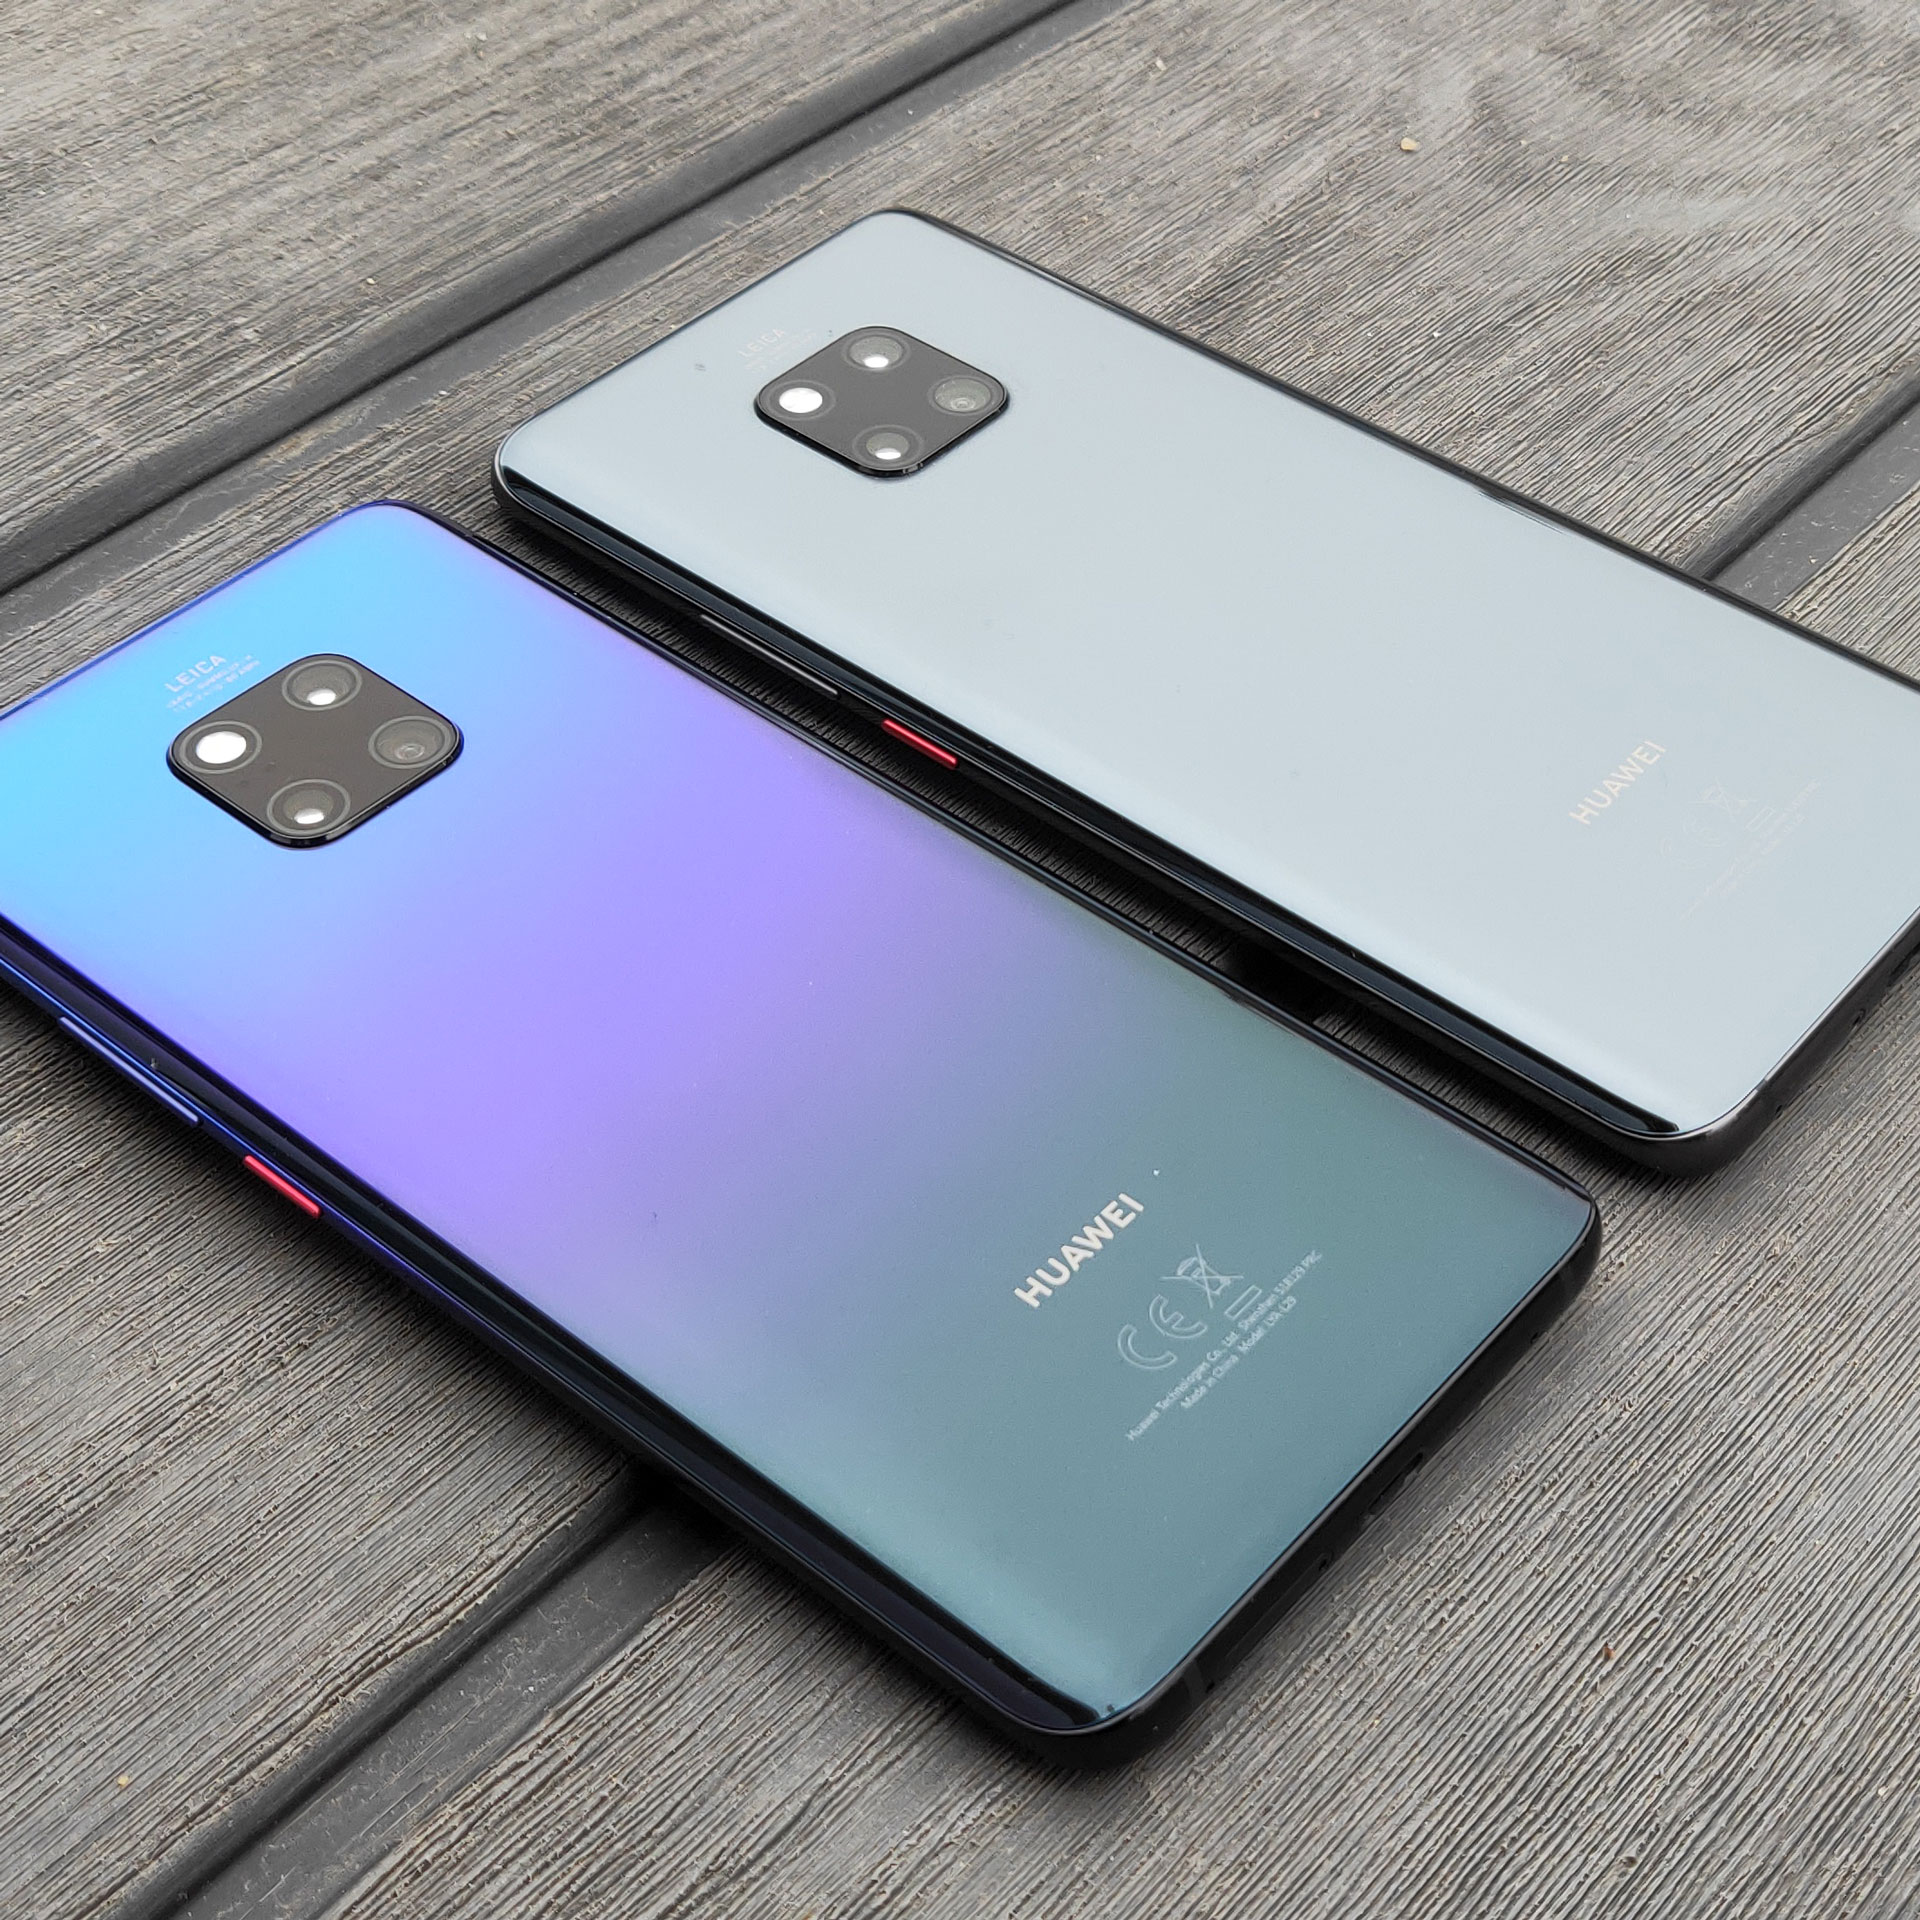 Review: Huawei Mate20 Pro (Snelle Android met top fotocamera